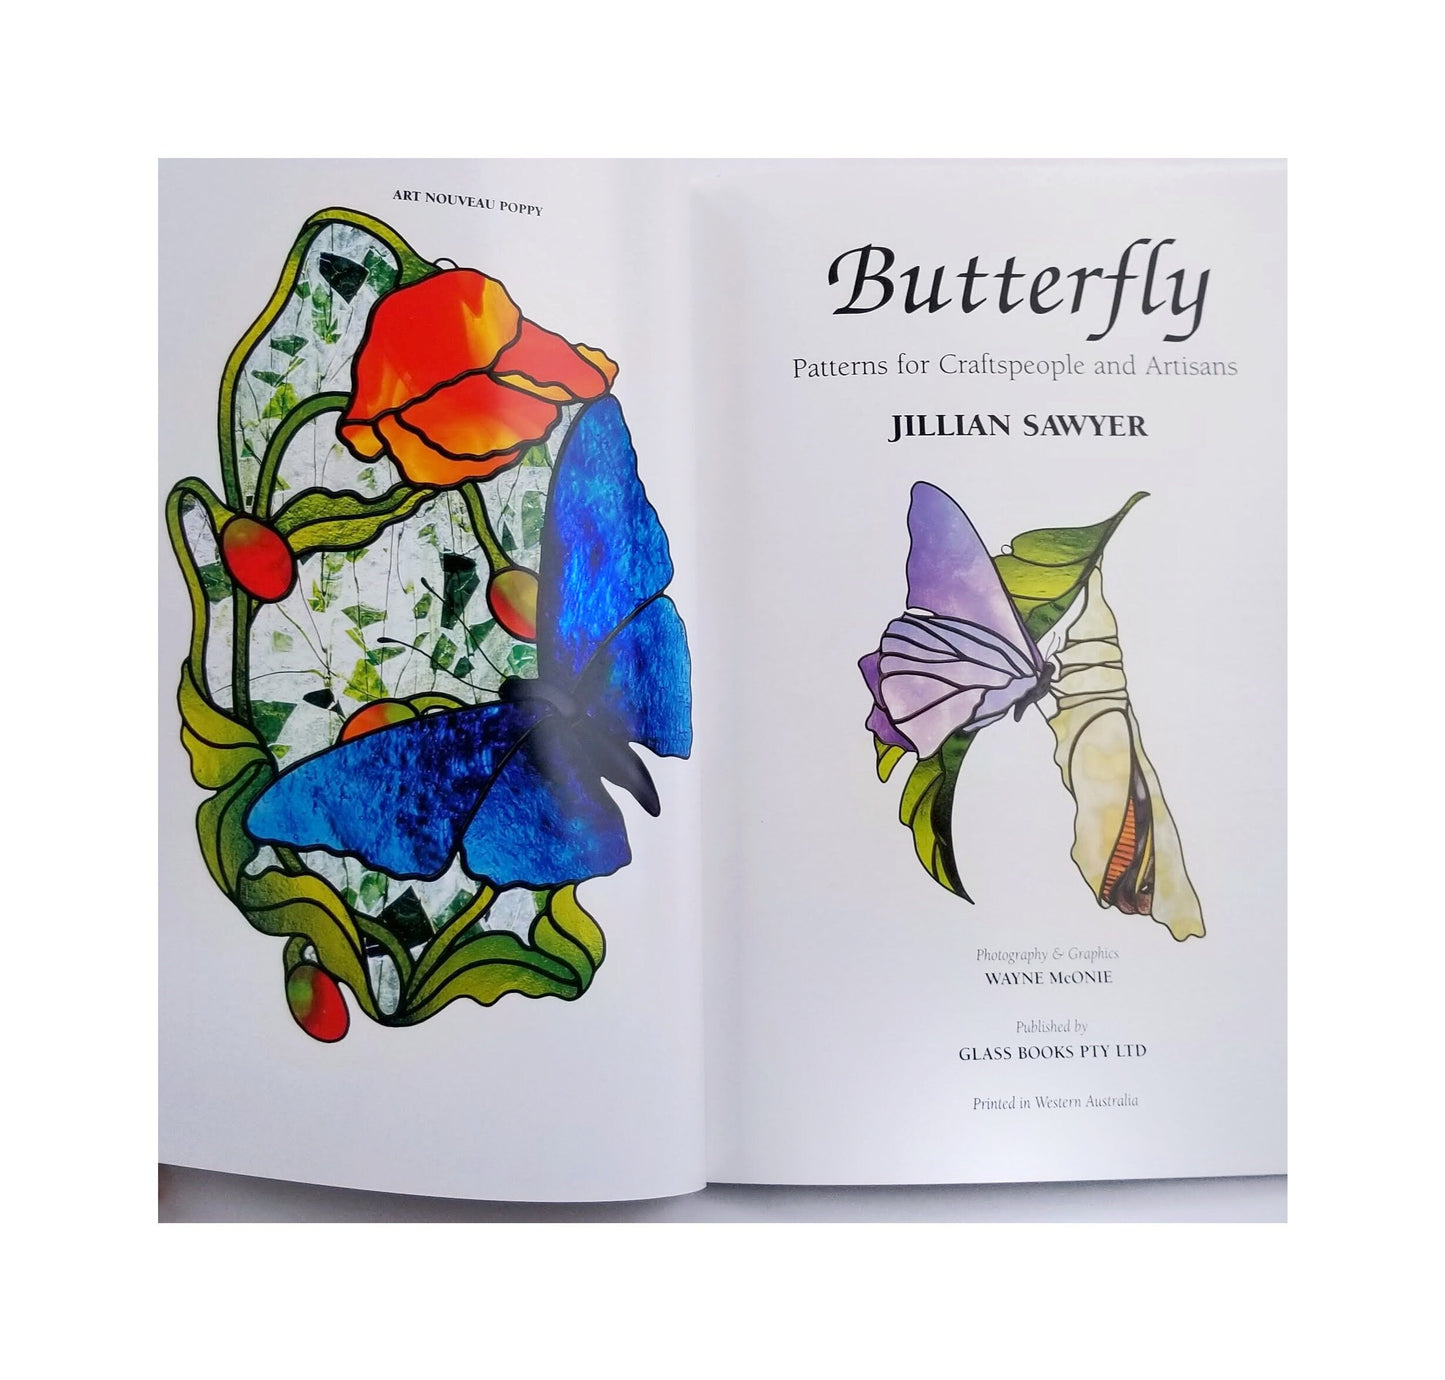 Butterfly Pattern Design Book, Stained Glass Craft Projects with Beautiful Winged Ladies. Nice Color Photos. Jillian Sawyer author.